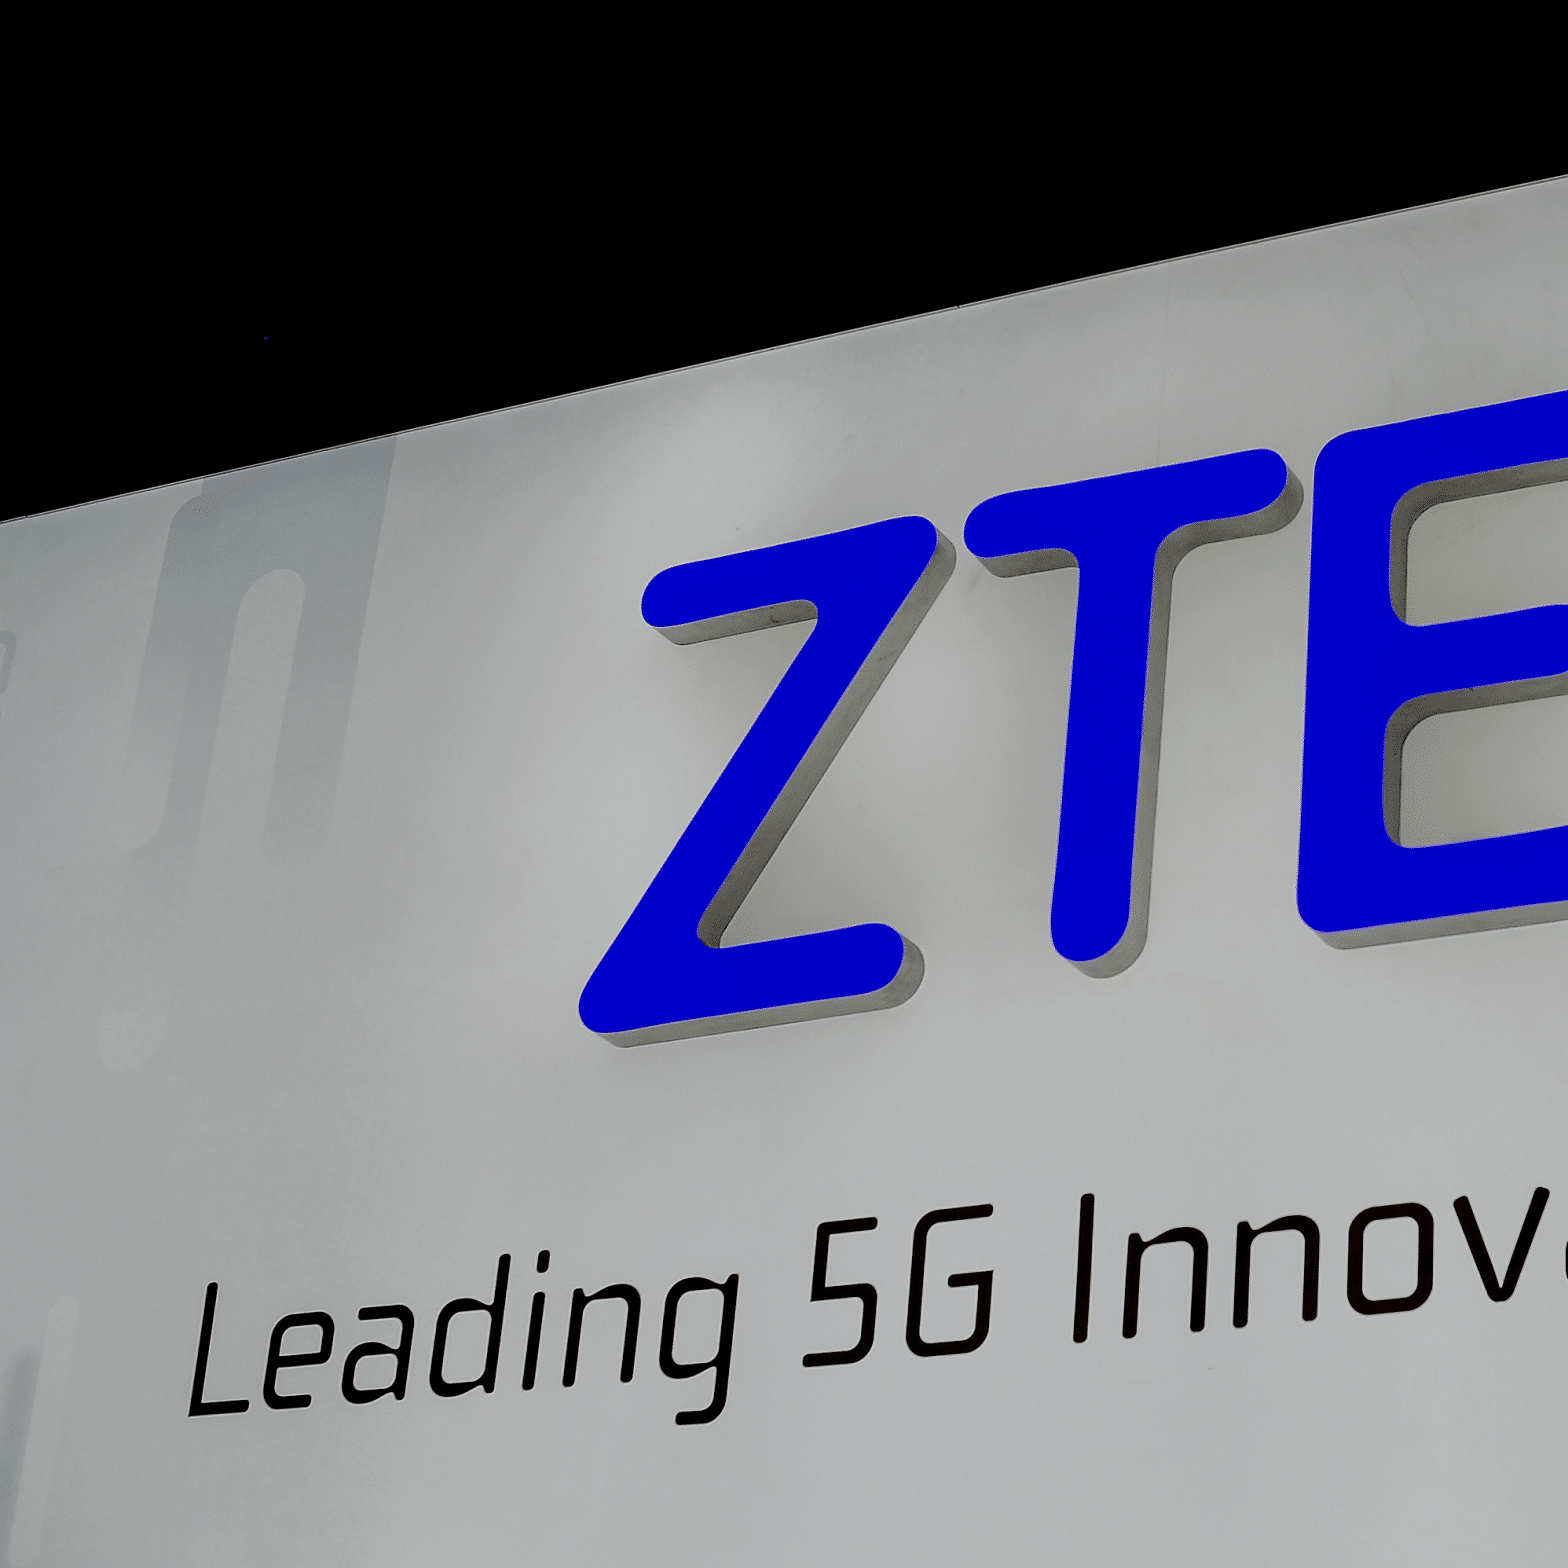 Bipartisan Group of Senators Move to Hold Chinese Telecom Firm ZTE Accountable in “Significant, Painful” Way